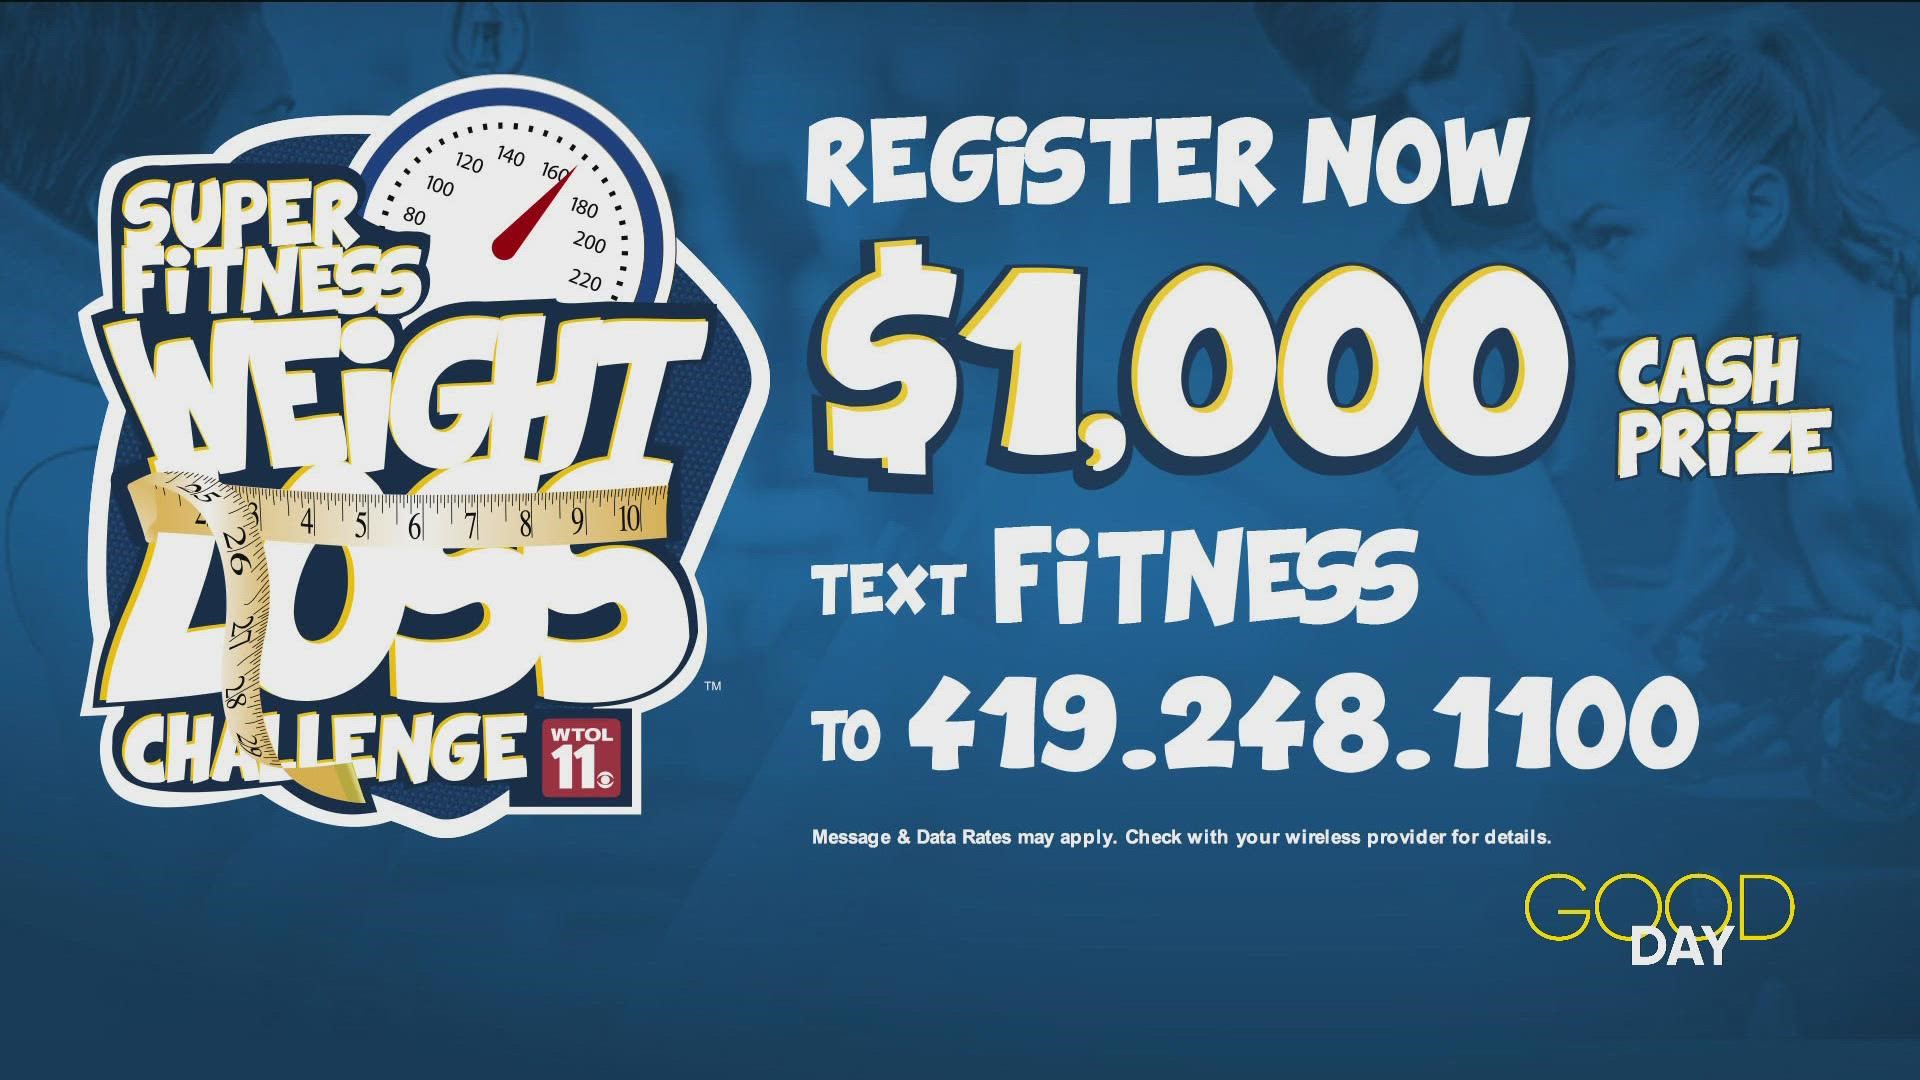 To register, text FITNESS to 419-248-1100 or stop by a Super Fitness location. Kickoff party is Oct. 18.